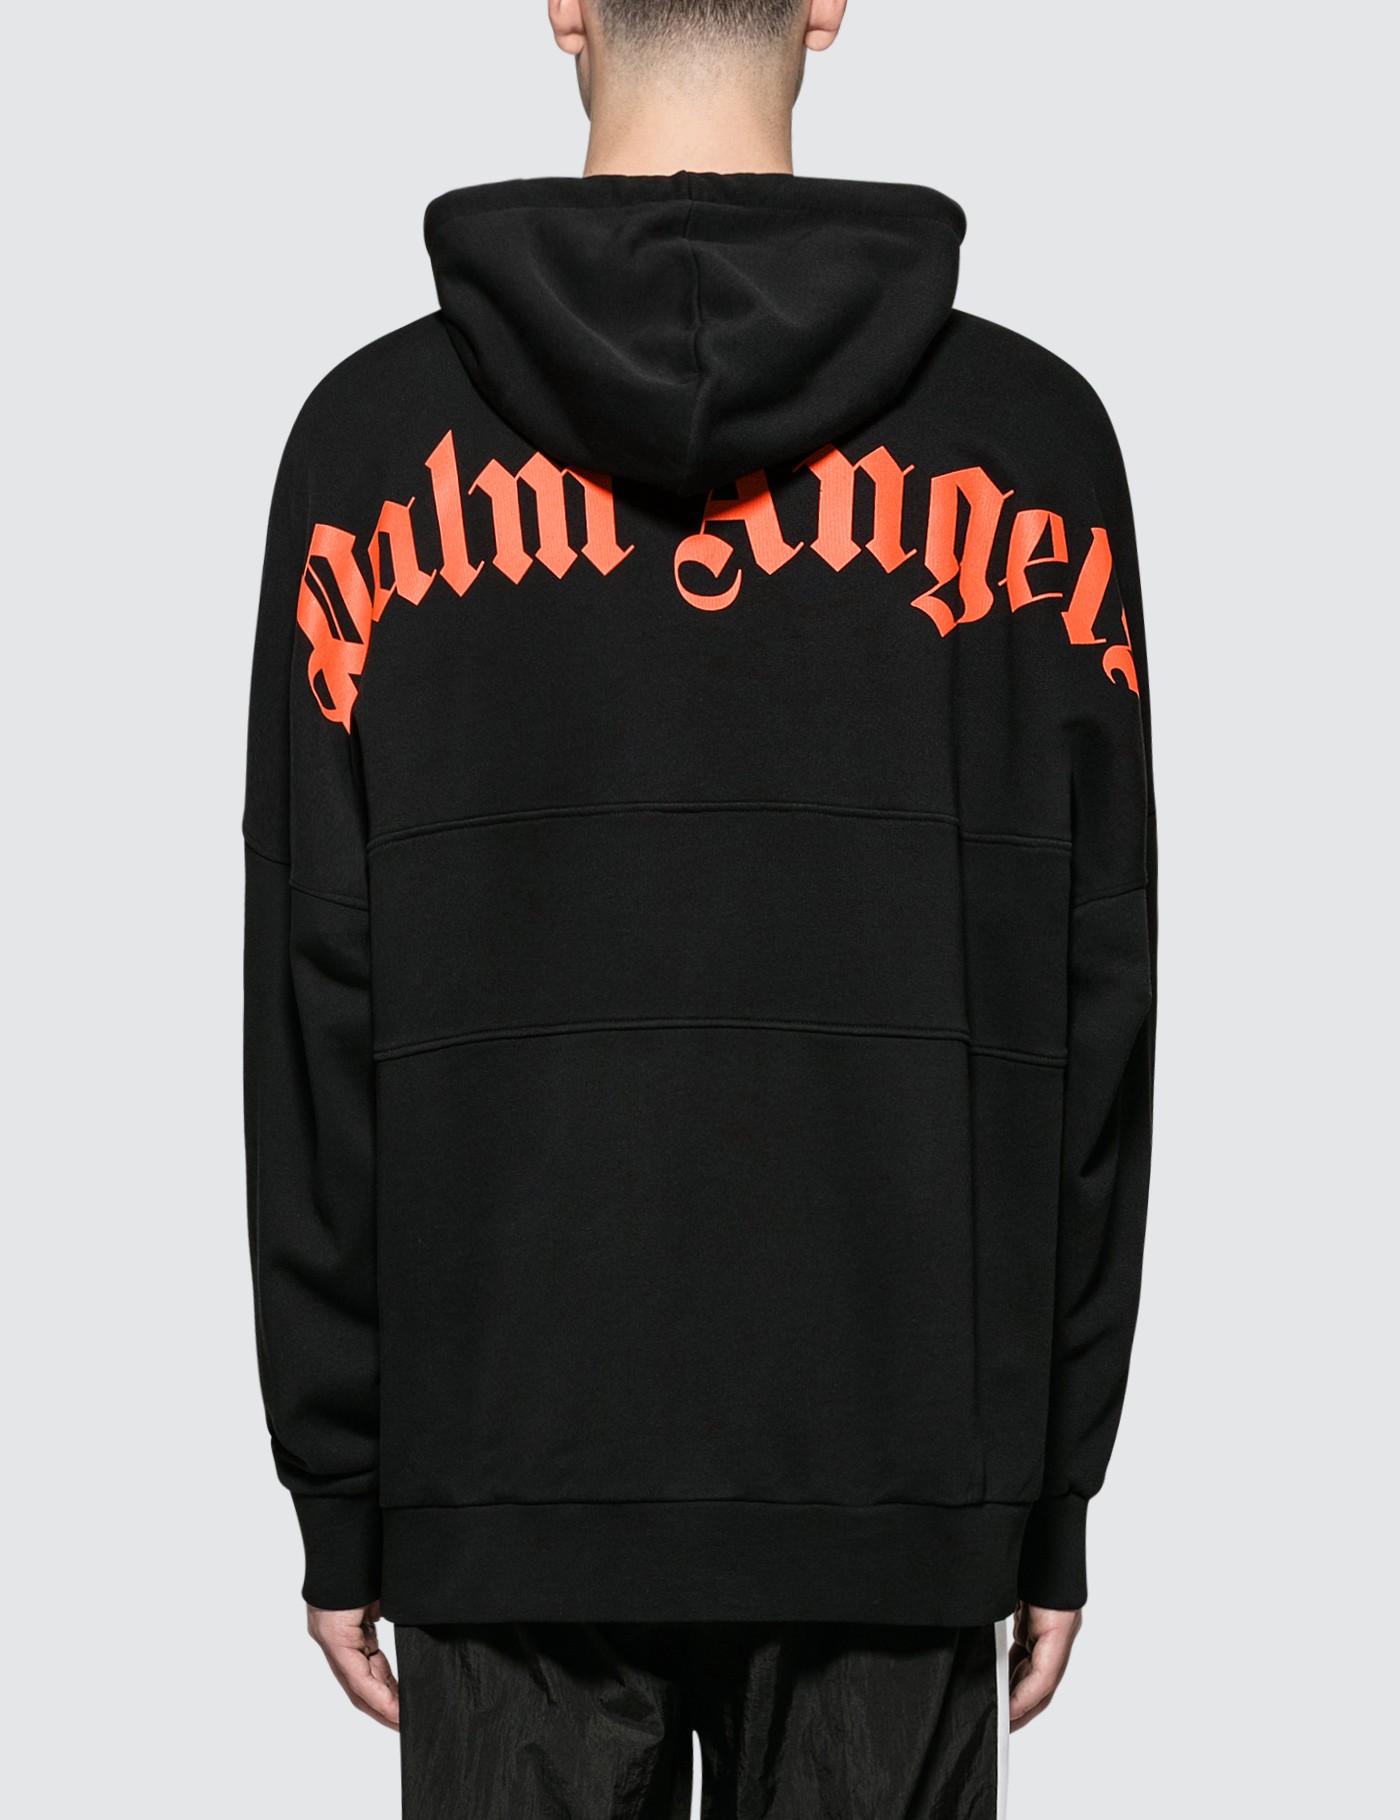 Palm Angels Cotton 3 Colors Logo Over Hoodie in Black for Men - Lyst